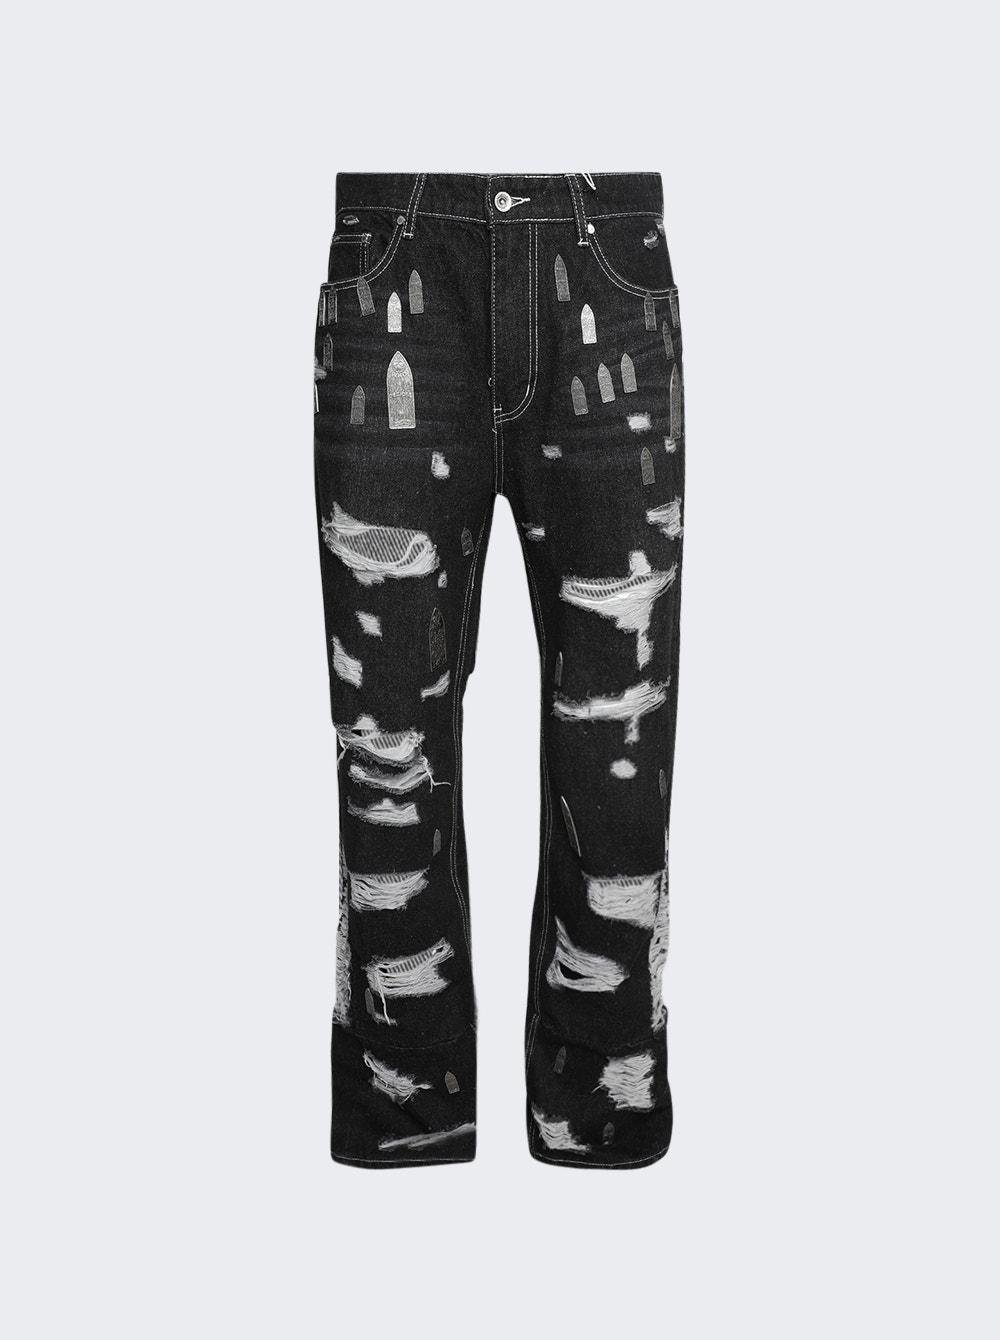 Amplified Gnarly Denim Coal  | The Webster by WHO DECIDES WAR